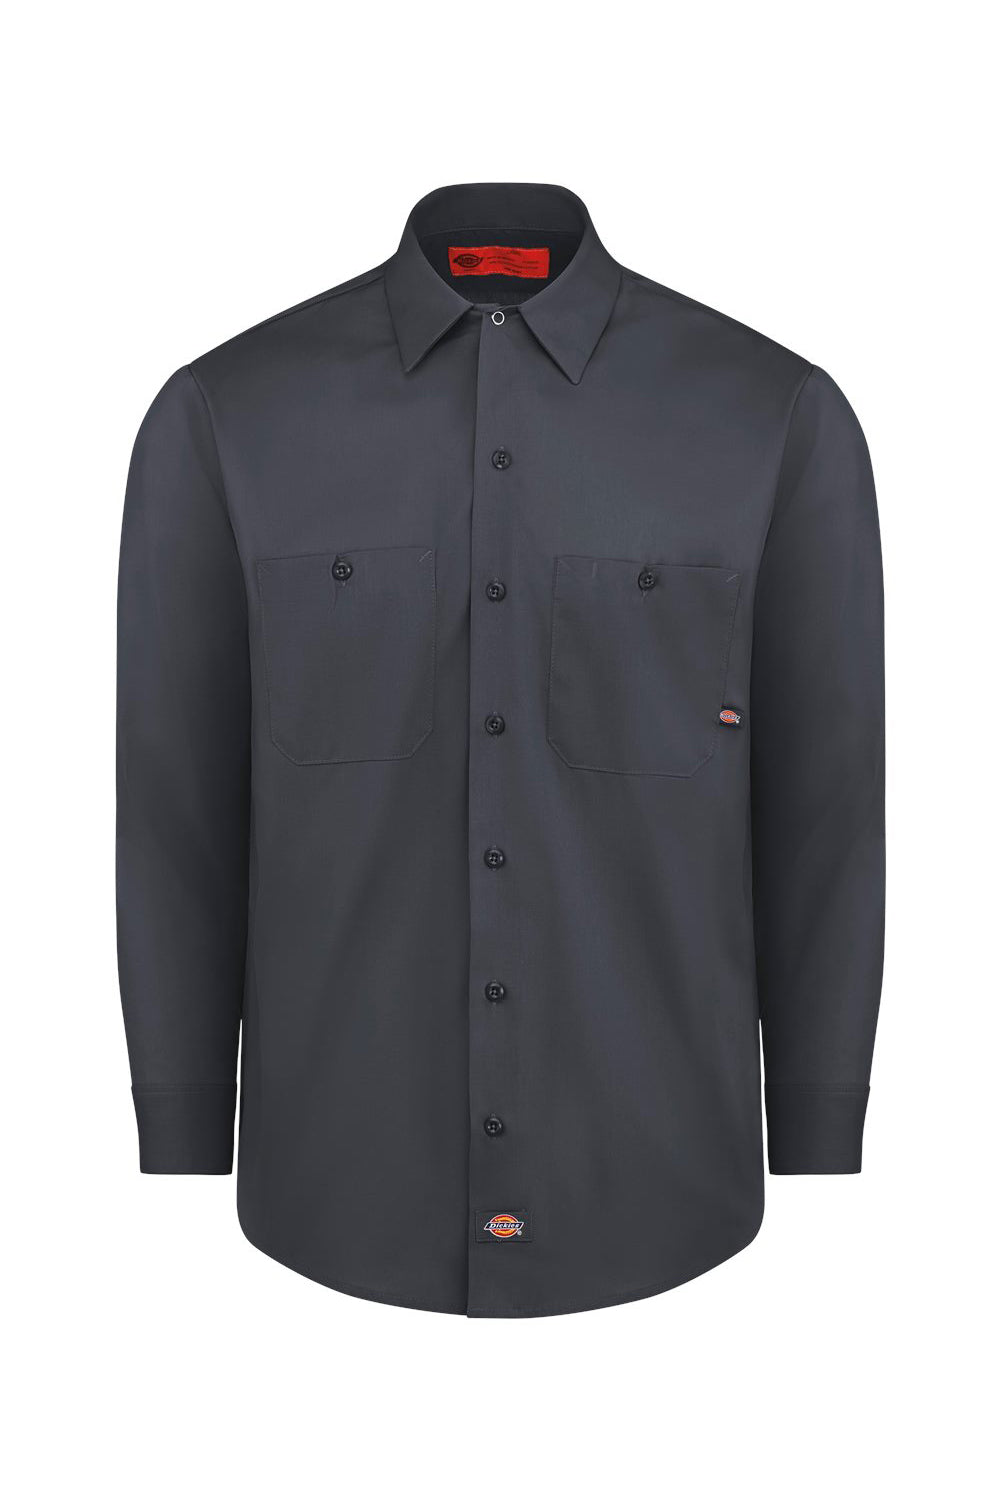 Dickies L535 Mens Industrial Wrinkle Resistant Long Sleeve Button Down Work Shirt w/ Double Pockets Dark Charcoal Grey Flat Front